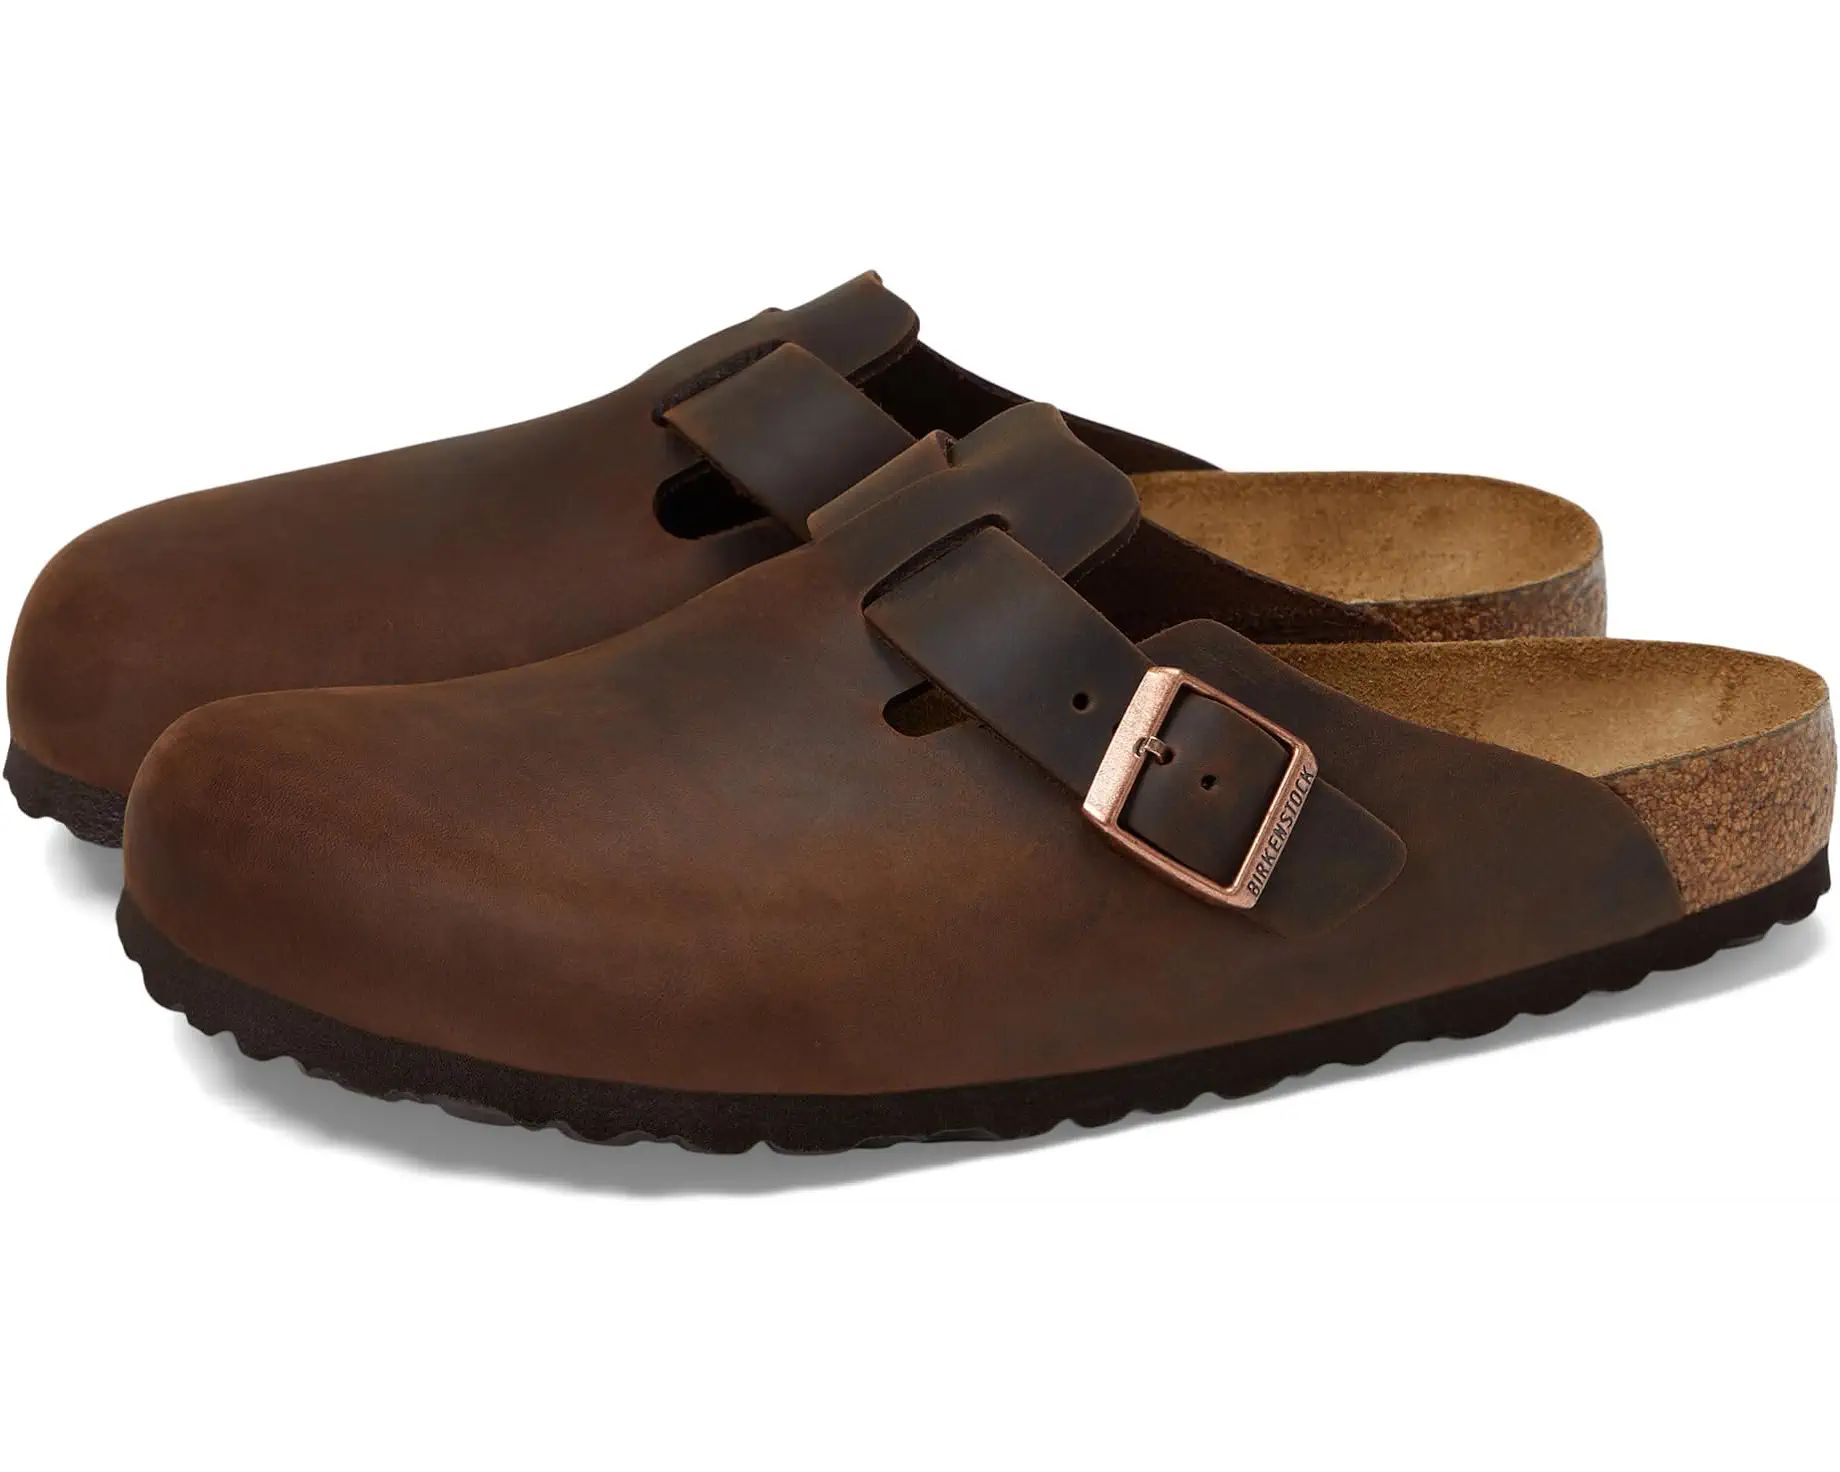 Birkenstock Boston Soft Footbed - Oiled Leather (Unisex) | Zappos